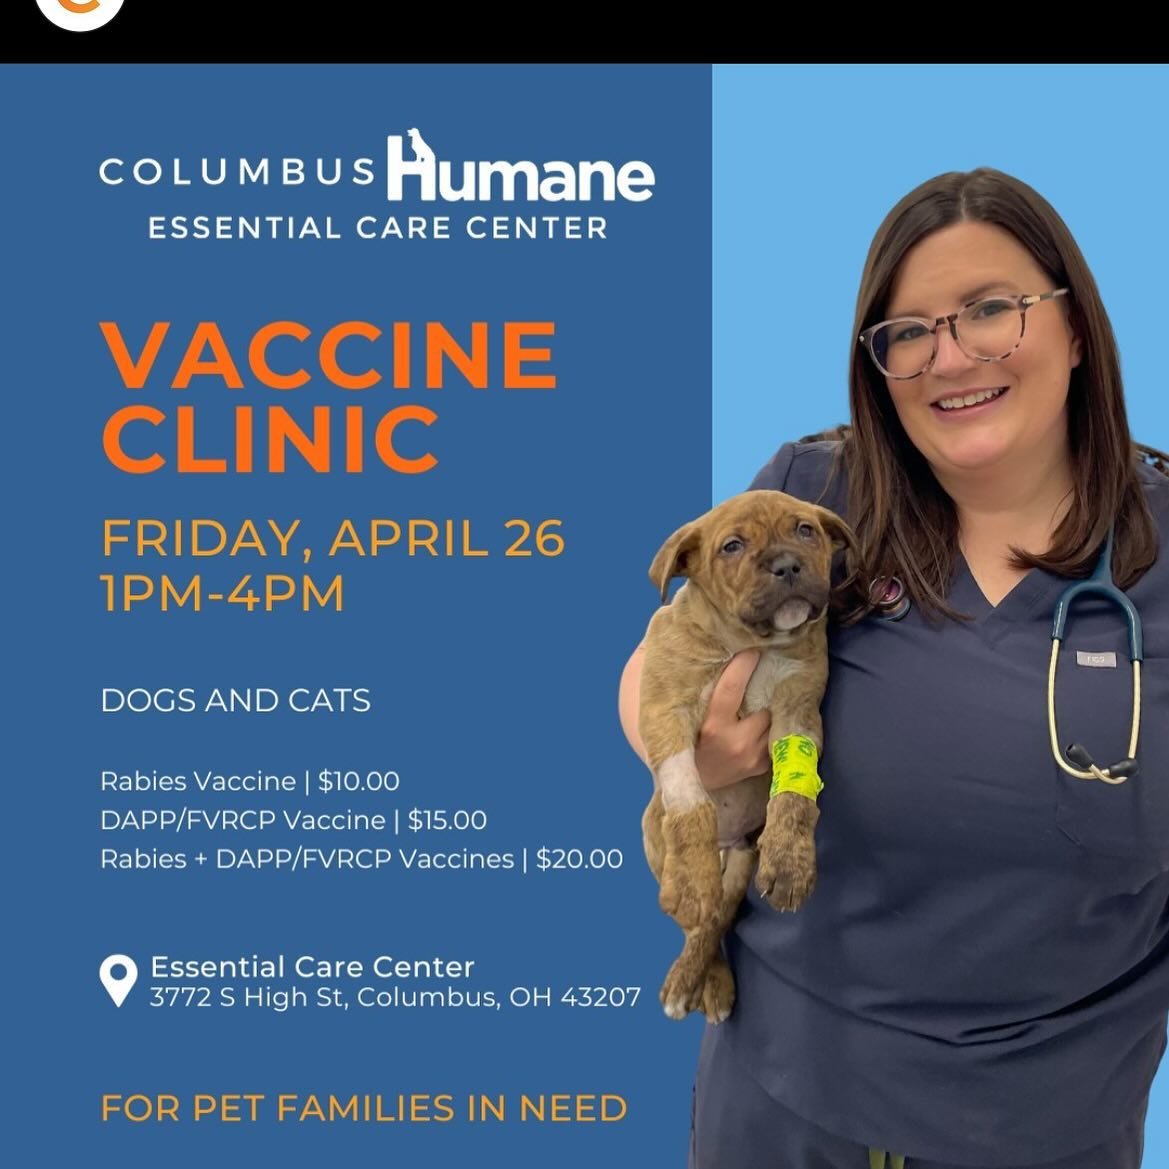 HAPPENING TODAY FROM 1-4PM. 

The Columbus Humane Essential Care Center is offering a vaccine clinic for dogs and cats TODAY, April 26, 2024 from 1PM-4PM. We are offering core vaccines for dogs and cats at a reduced cost to anyone who cannot afford v